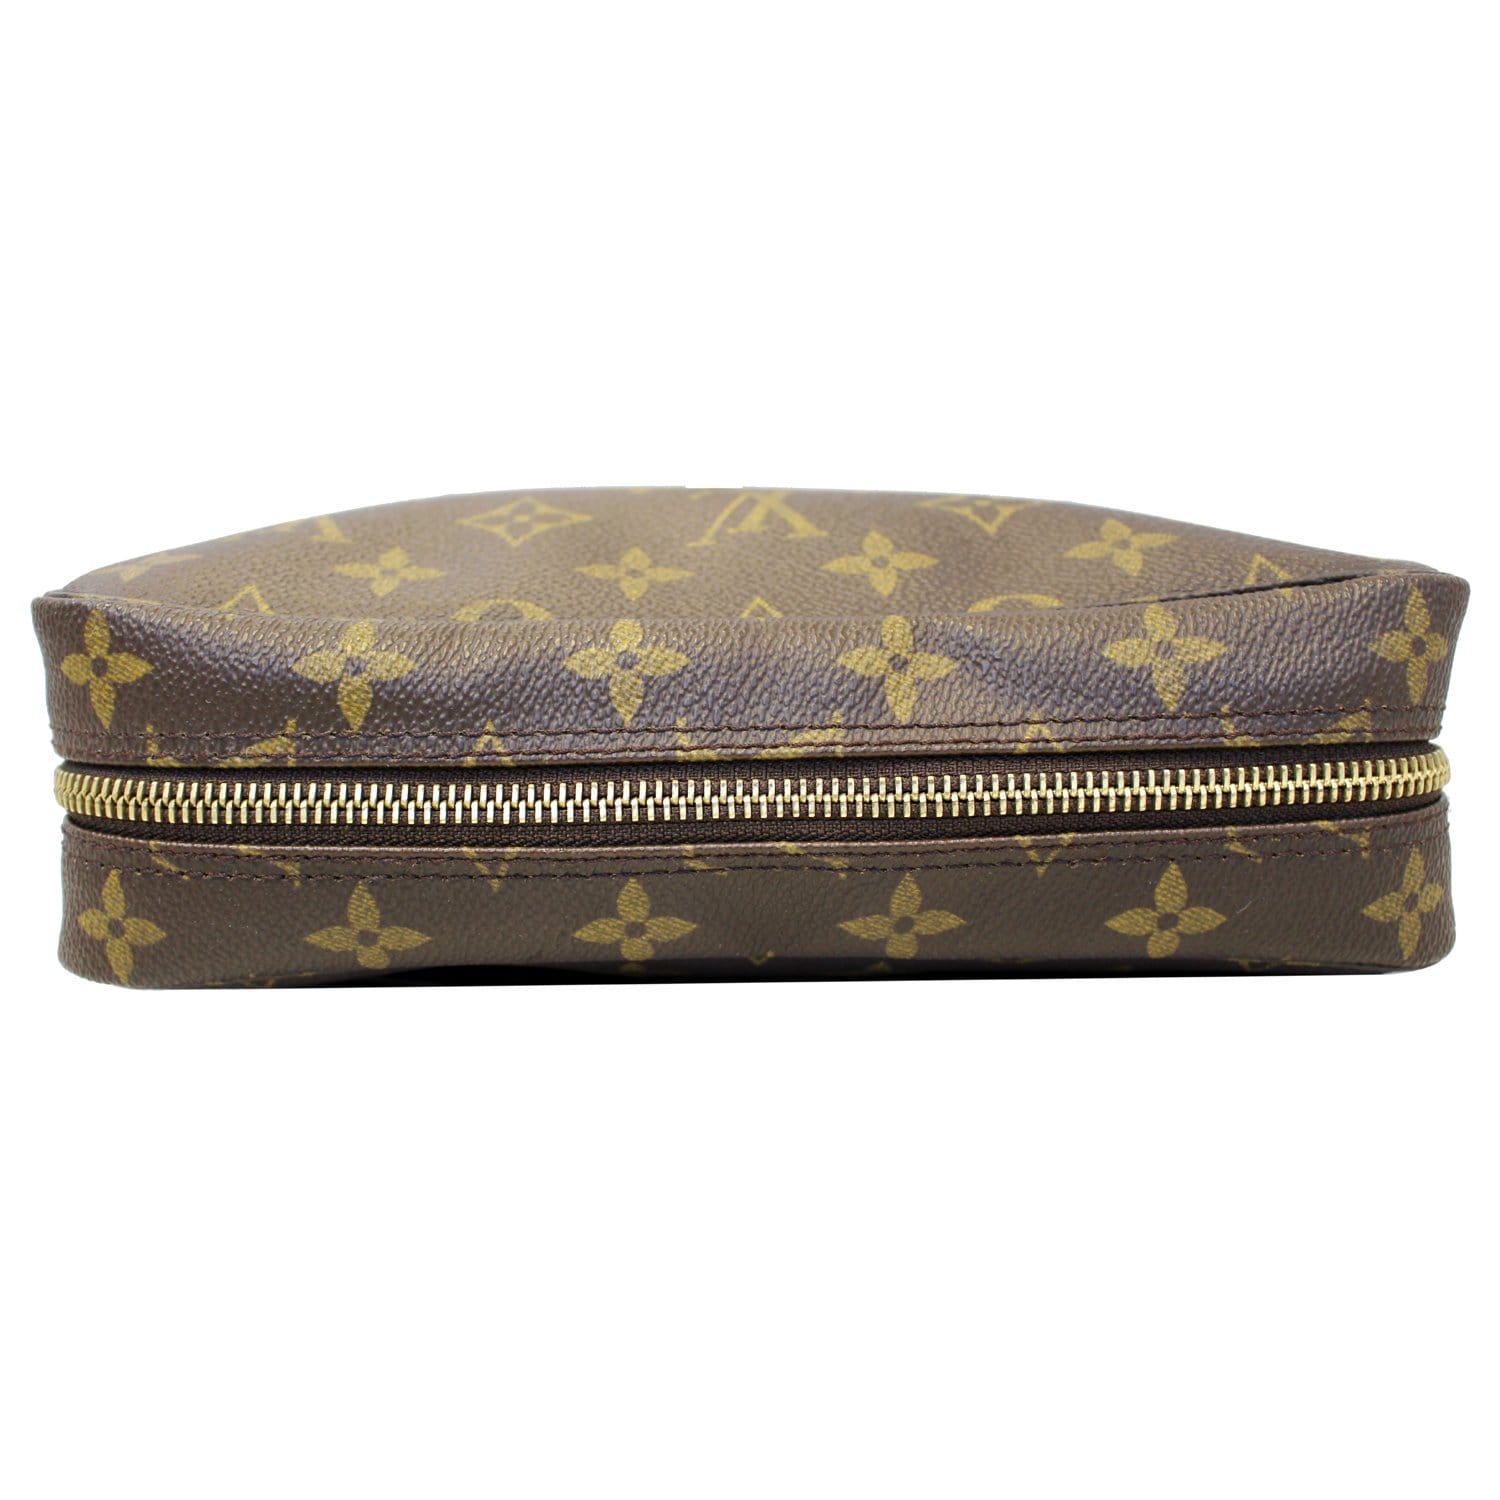 Louis Vuitton Green Palana Trousse Cosmetic Pouch Make Up Toiletry Case 1224lv29